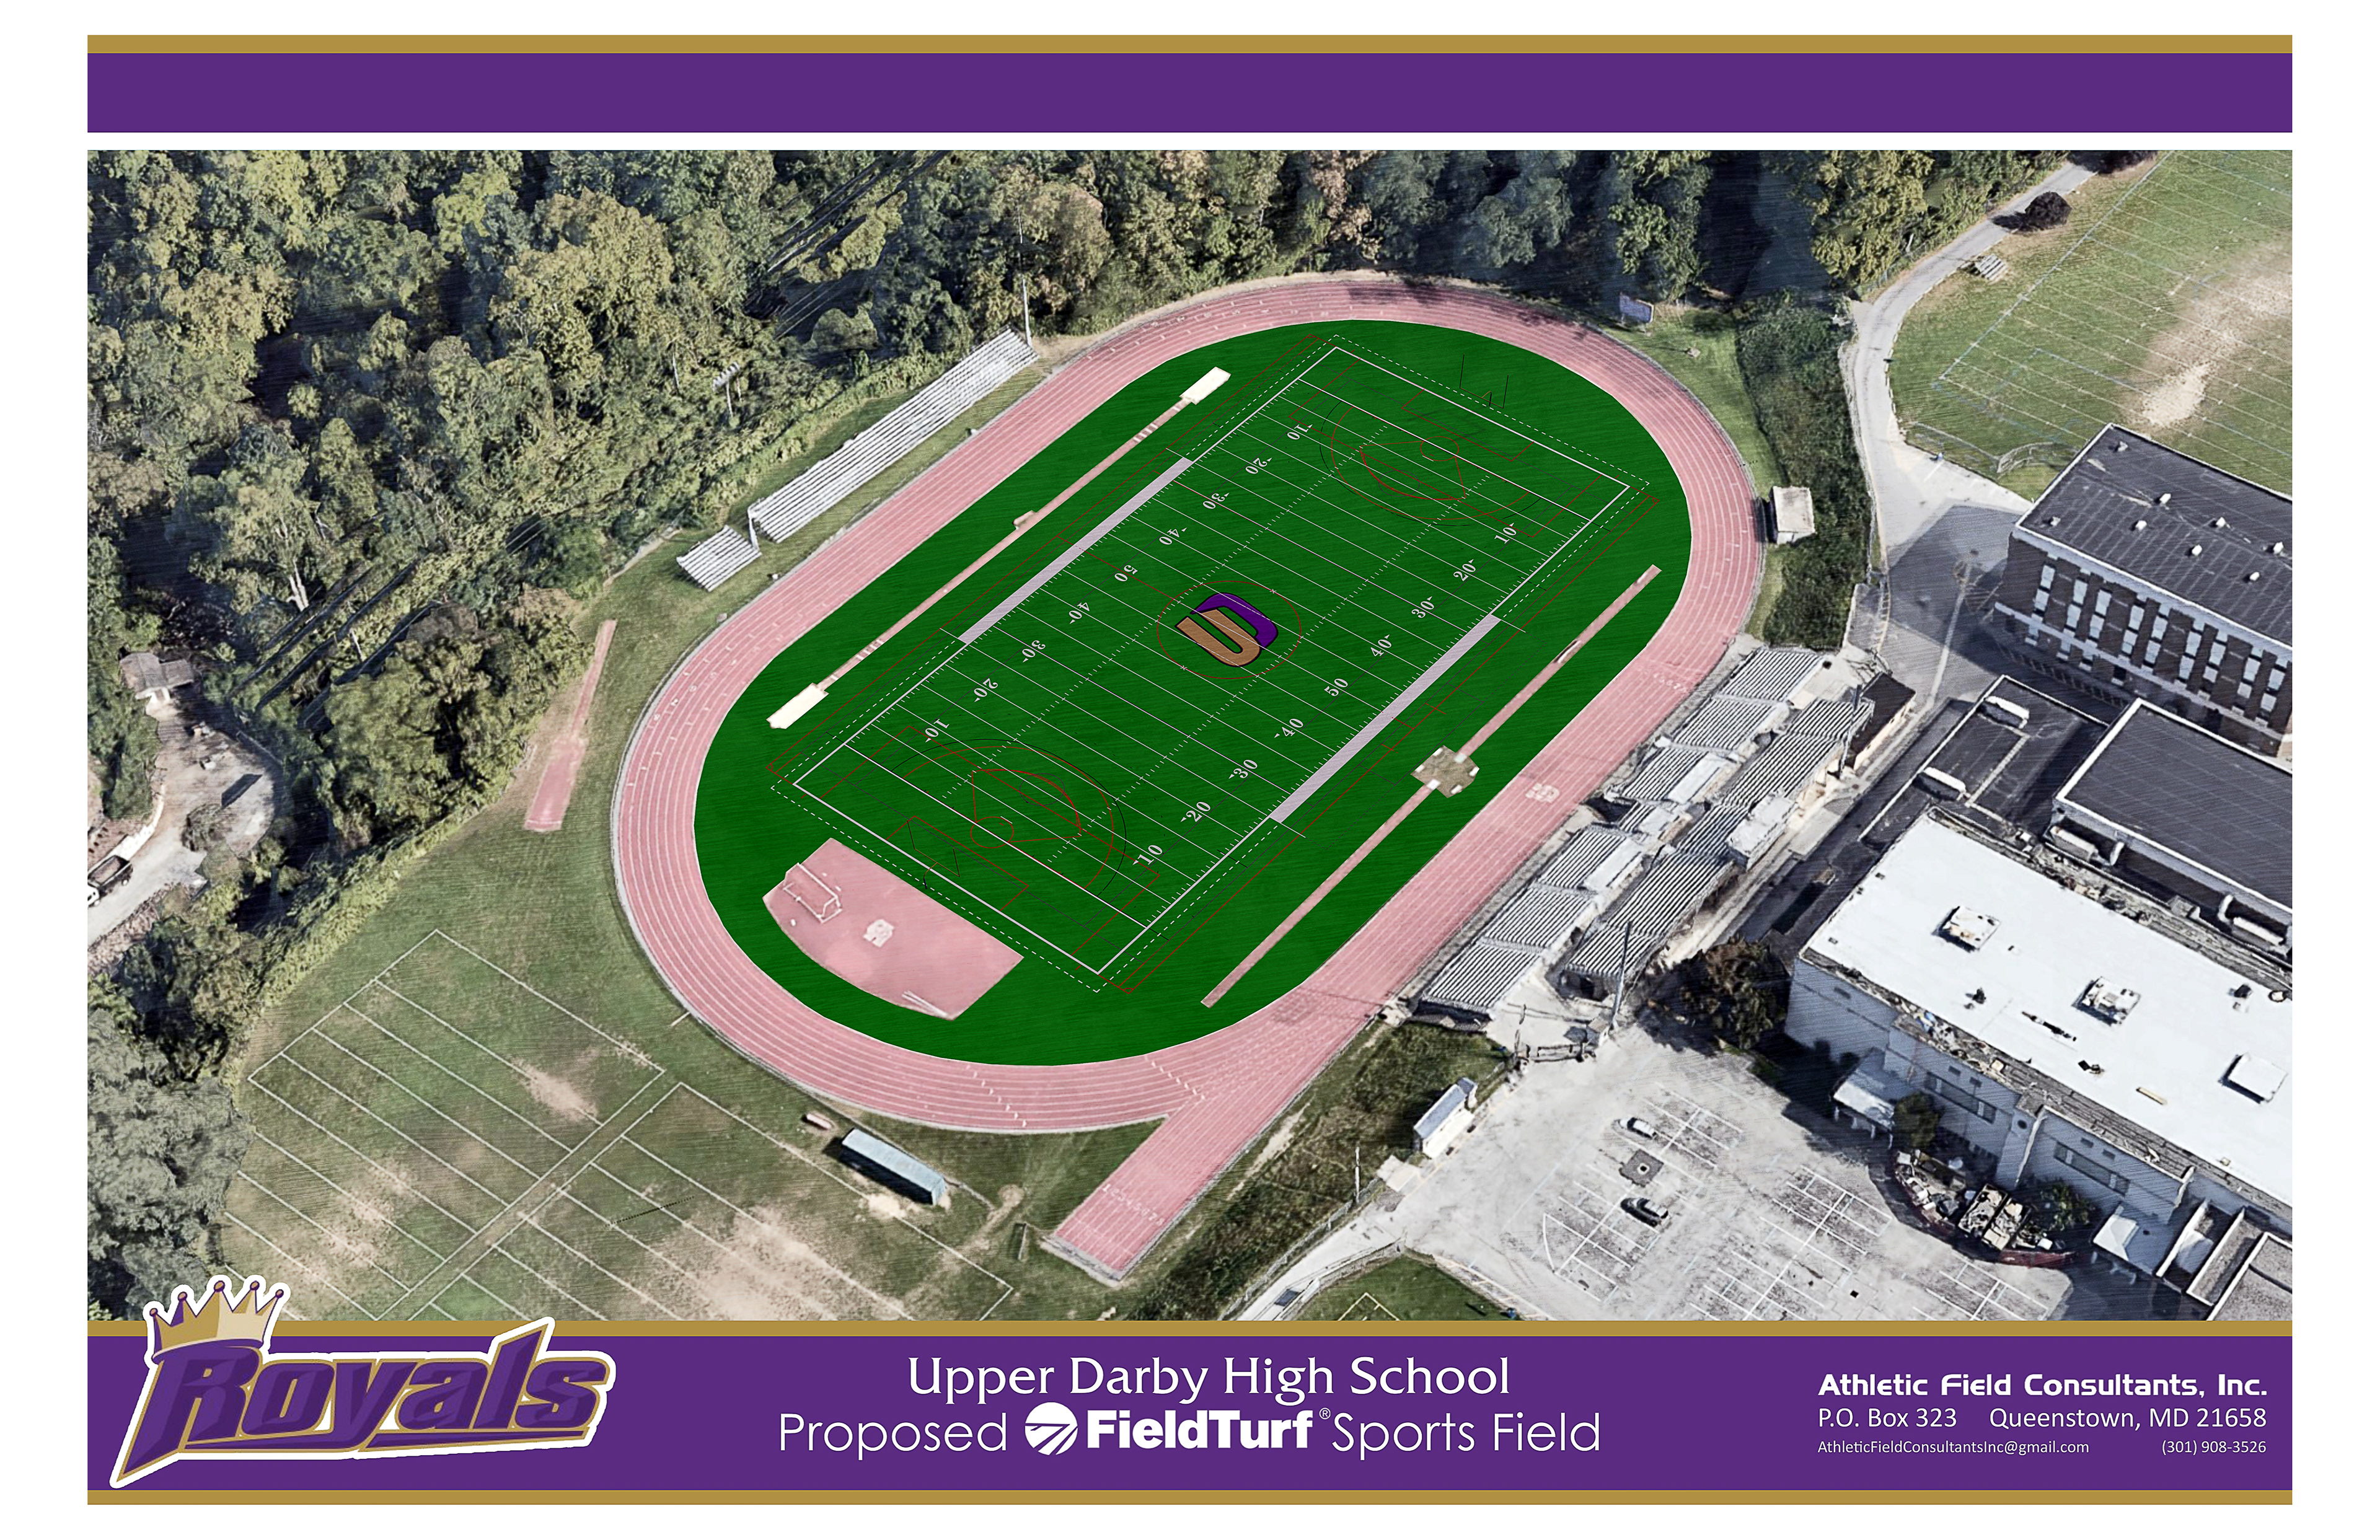 Athletic Field Consultants, Inc. - Upper Darby High School